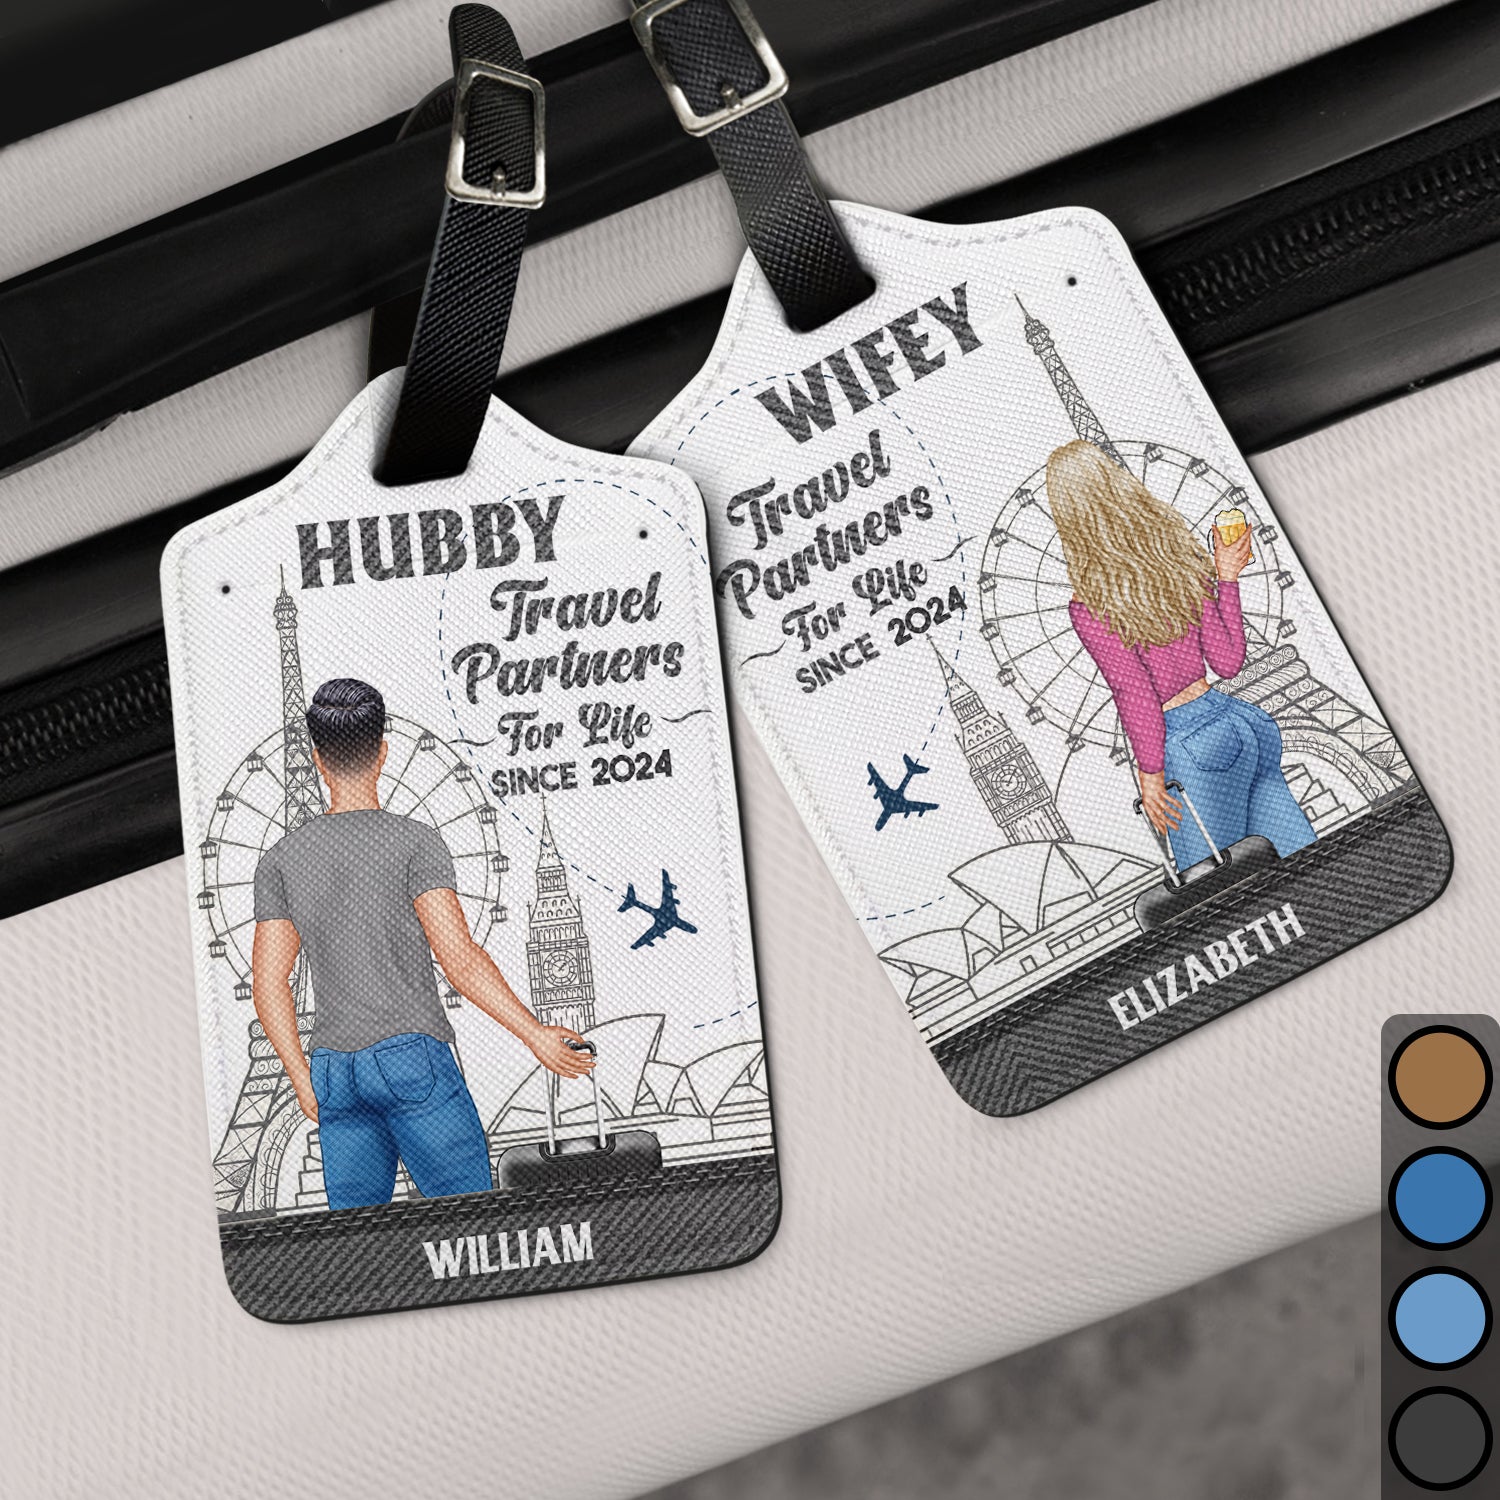 Traveling Couple Hubby & Wifey Travel Partners For Life - Gift For Couples, Traveling Gift - Personalized Combo 2 Luggage Tags